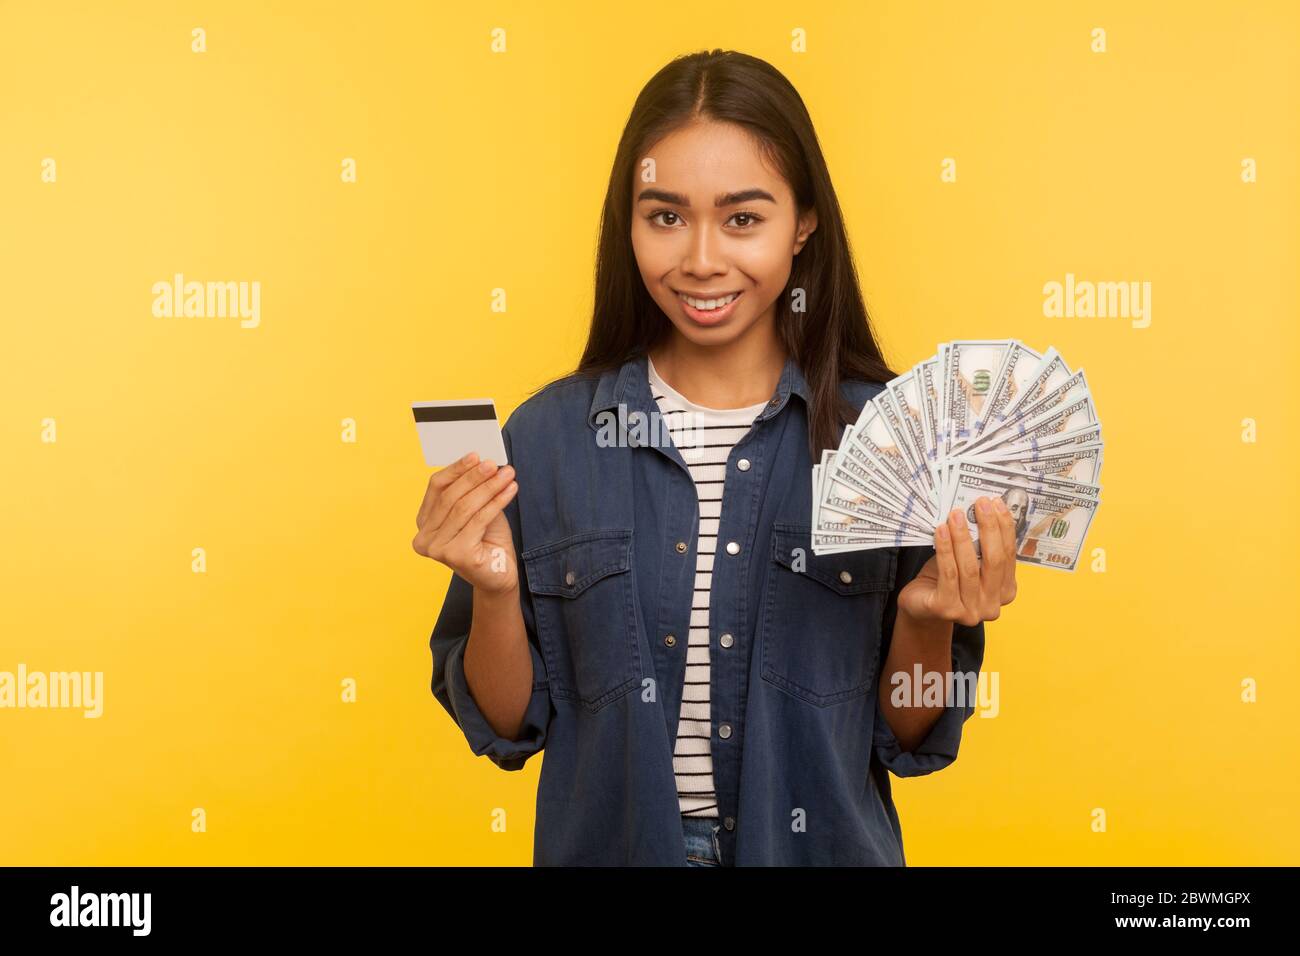 Bank deposit, financial savings. Portrait of happy girl in denim shirt holding credit card and dollar banknotes, looking at camera with toothy smile. Stock Photo